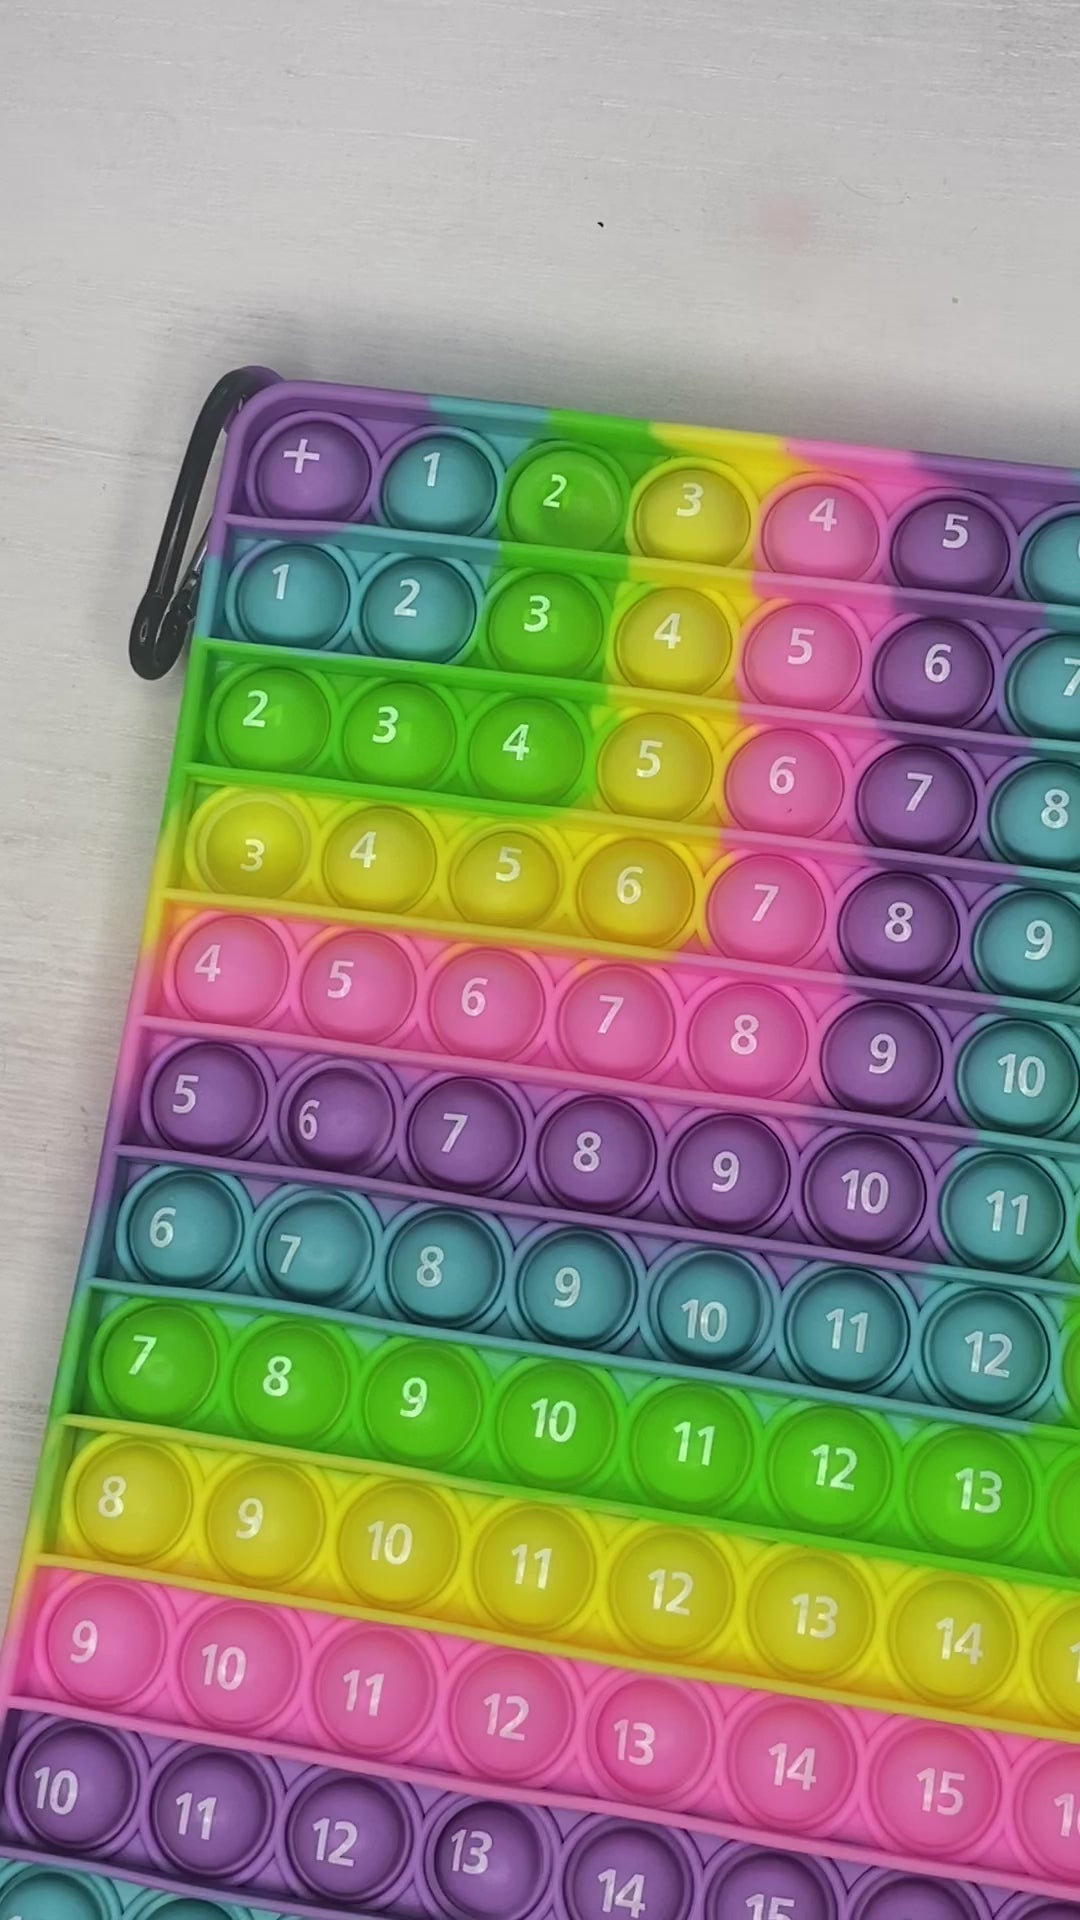 Sensory toy for learning math  addition and multiplication. Great hands-on learning for elementary age kids!